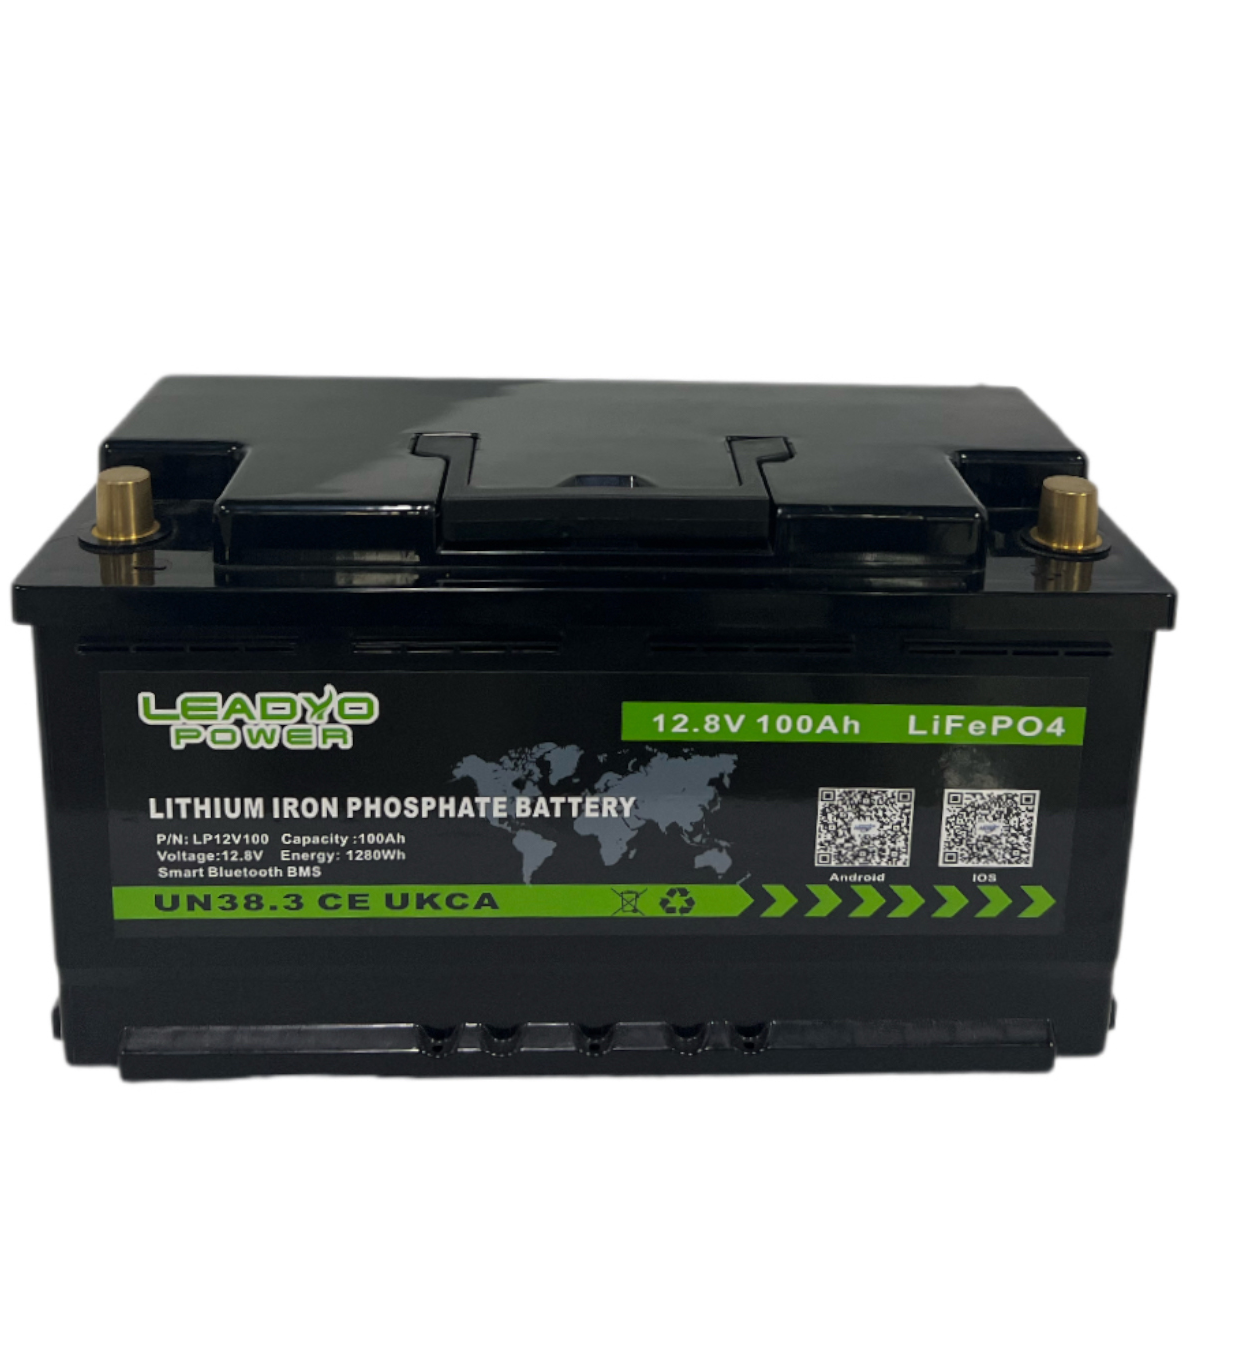 Leadyo Power: Your Trusted Partner for Lithium RV Batteries